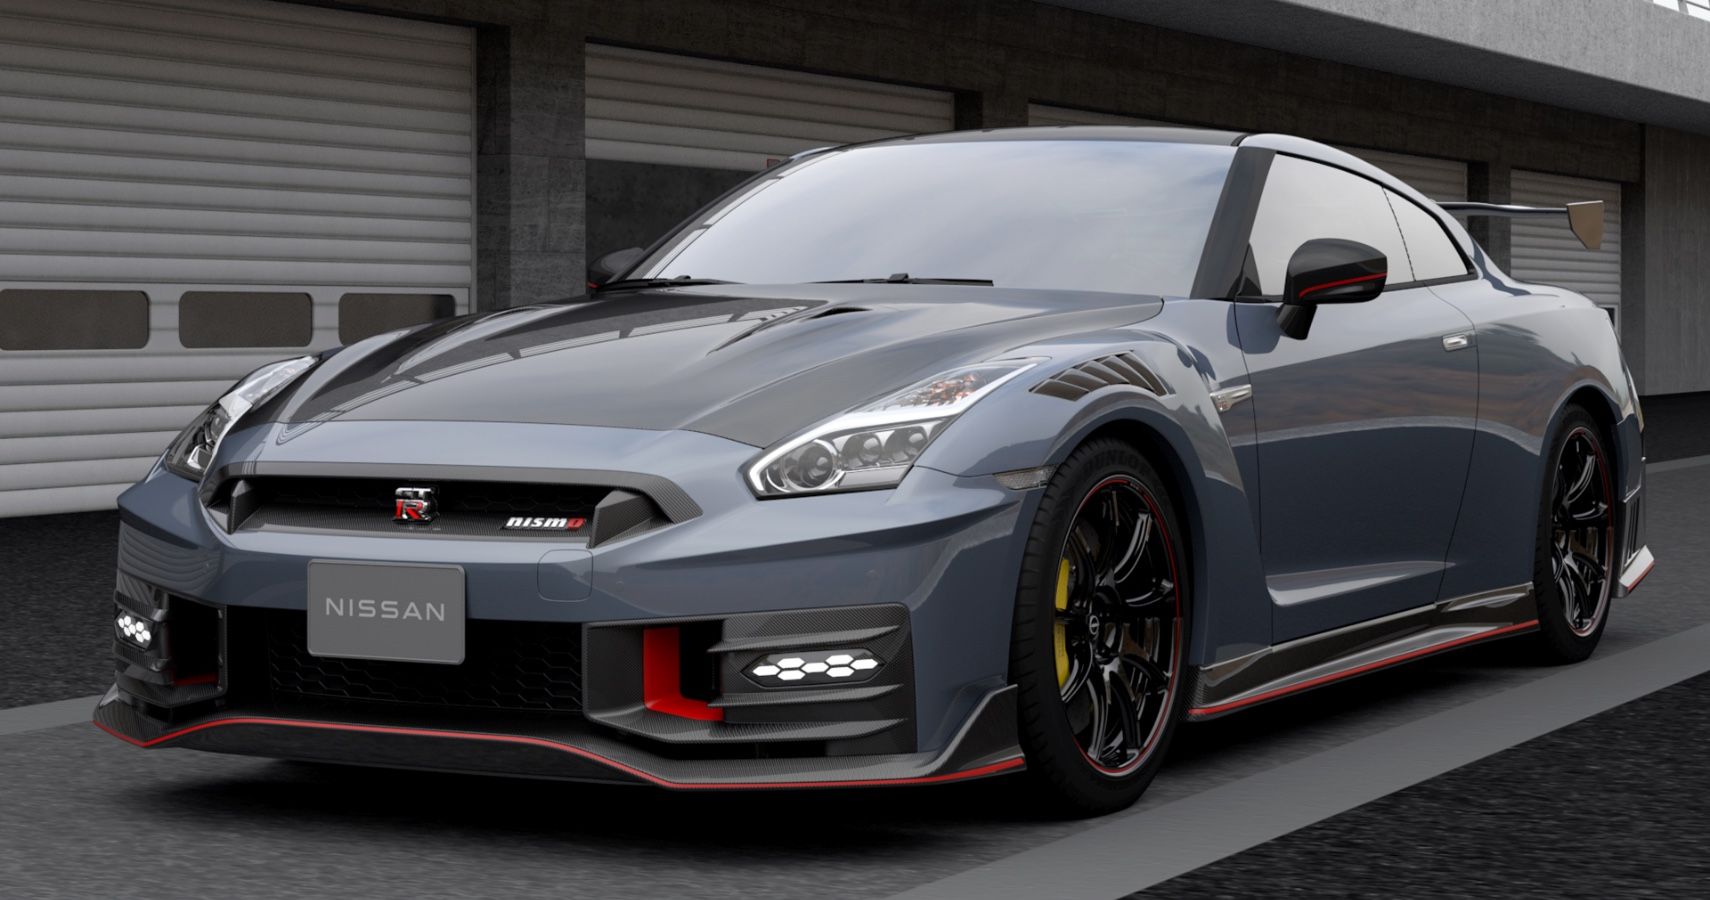 10 Modifications To Make Your Nissan GT-R Even Faster